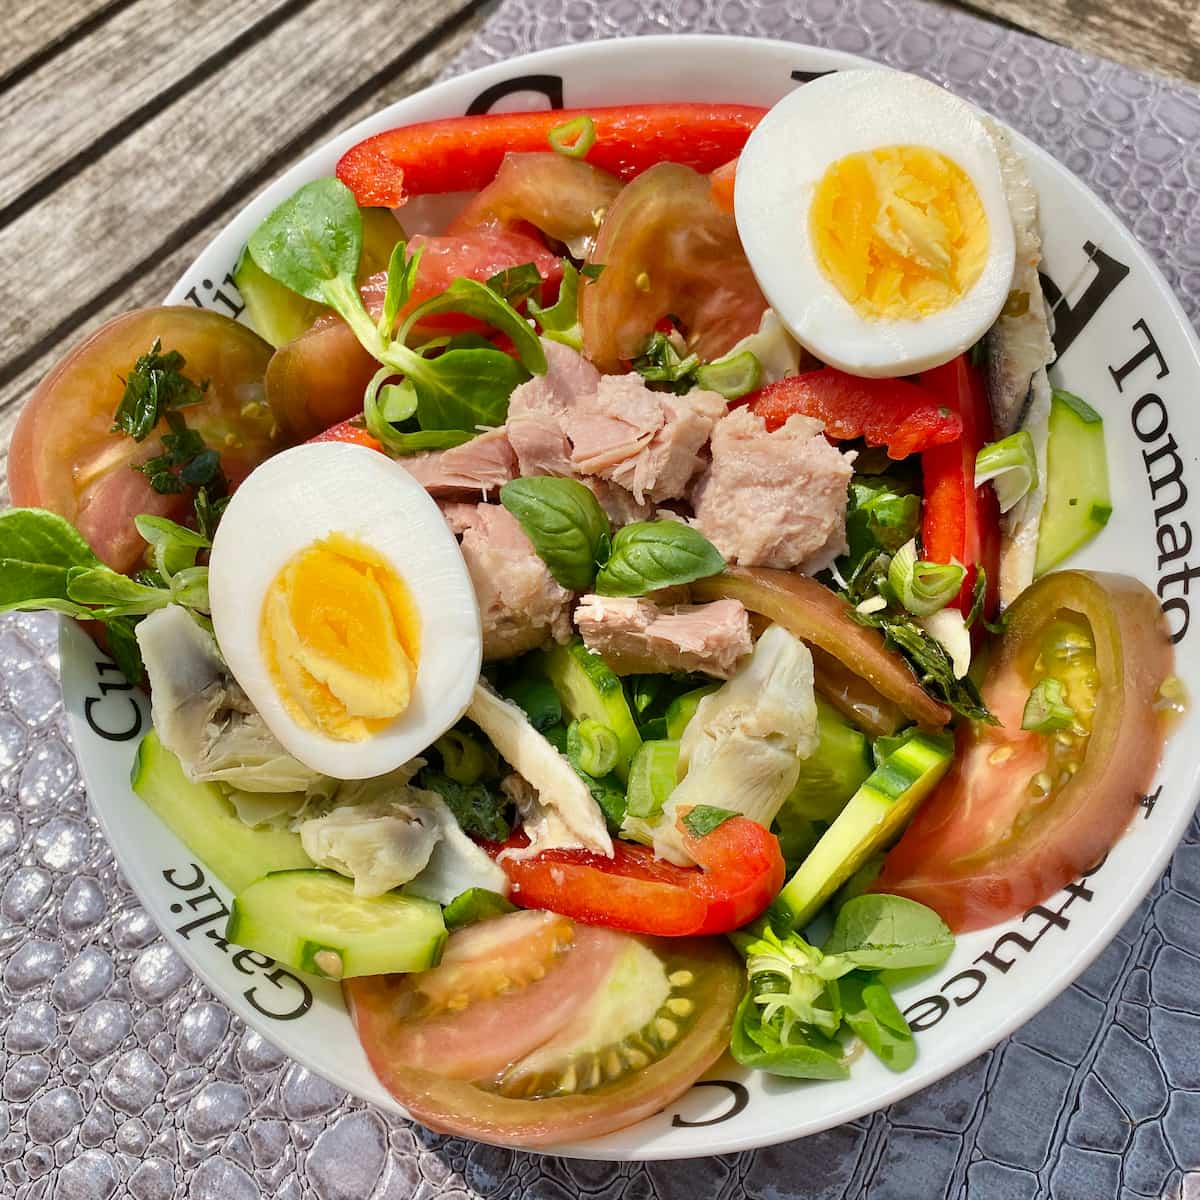 bowl of salad with boiled eggs, tomatoes, tuna, basil, cucumber, anchovies, peppers, salad leaves, spring onions, garlic and artichoke hearts